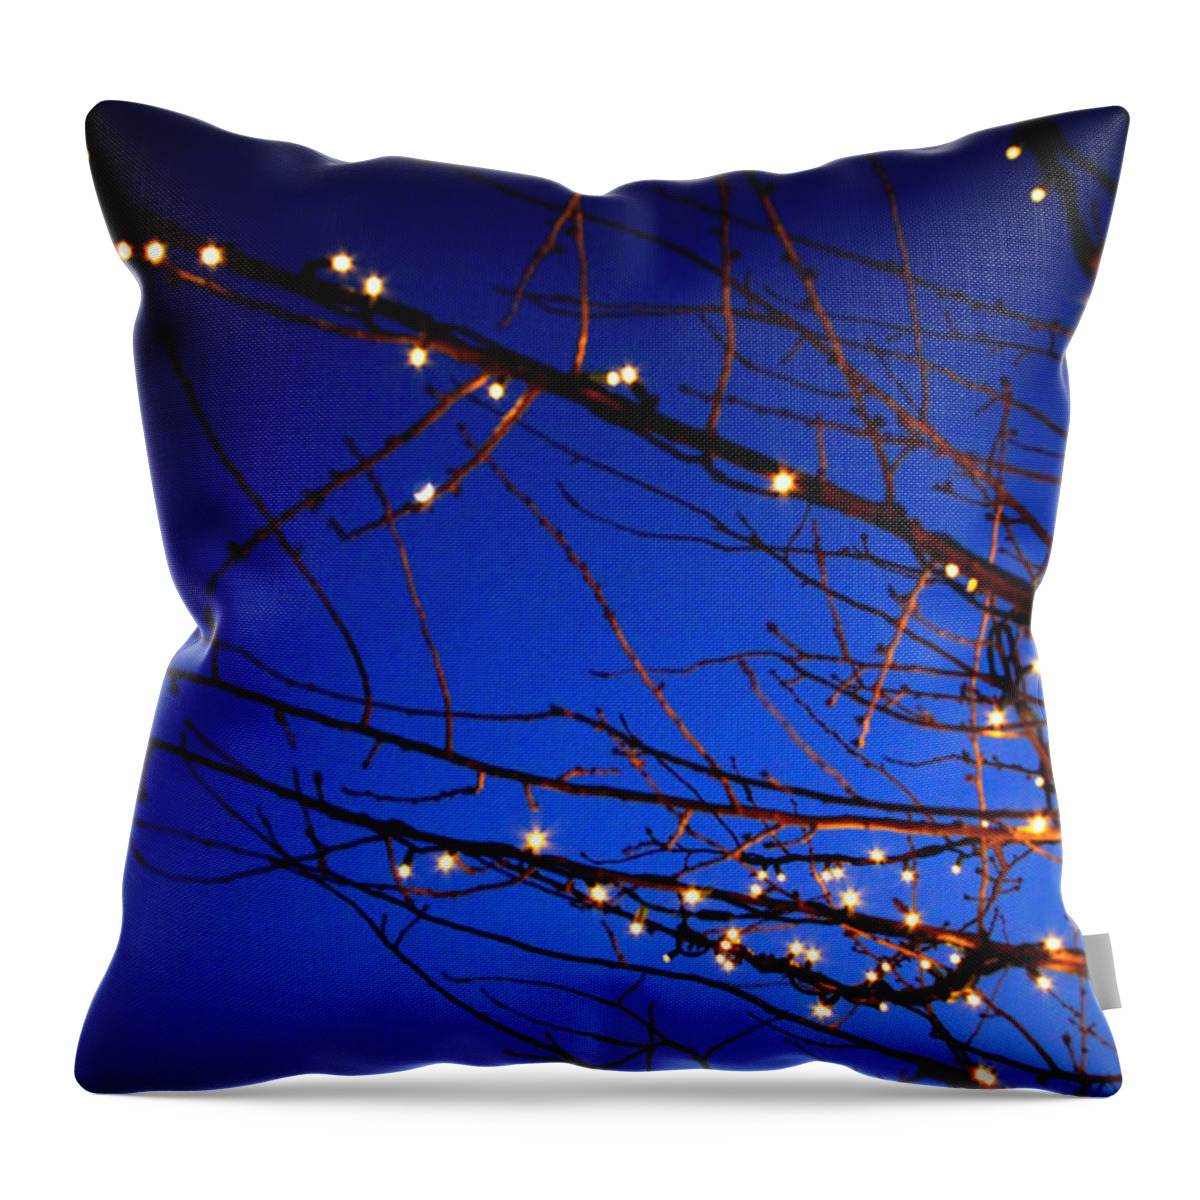 Holiday Lights Throw Pillow featuring the photograph Stars On Branches by Aurelio Zucco